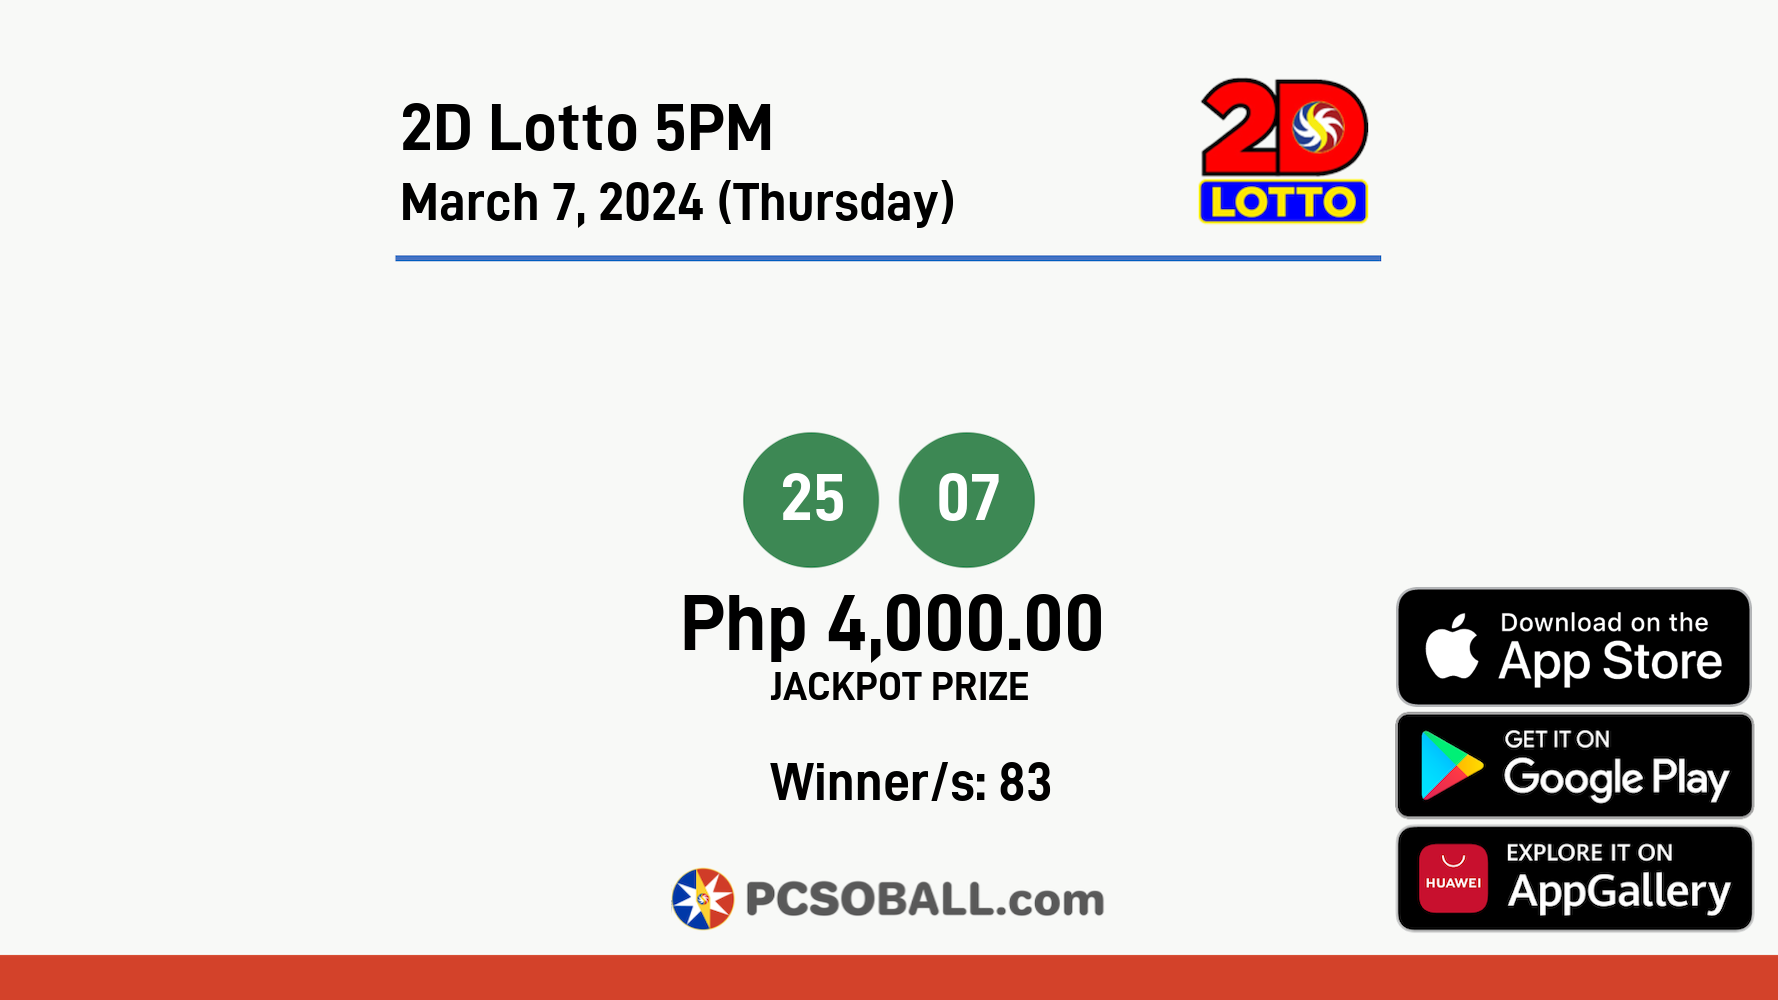 2D Lotto 5PM March 7, 2024 (Thursday) Result